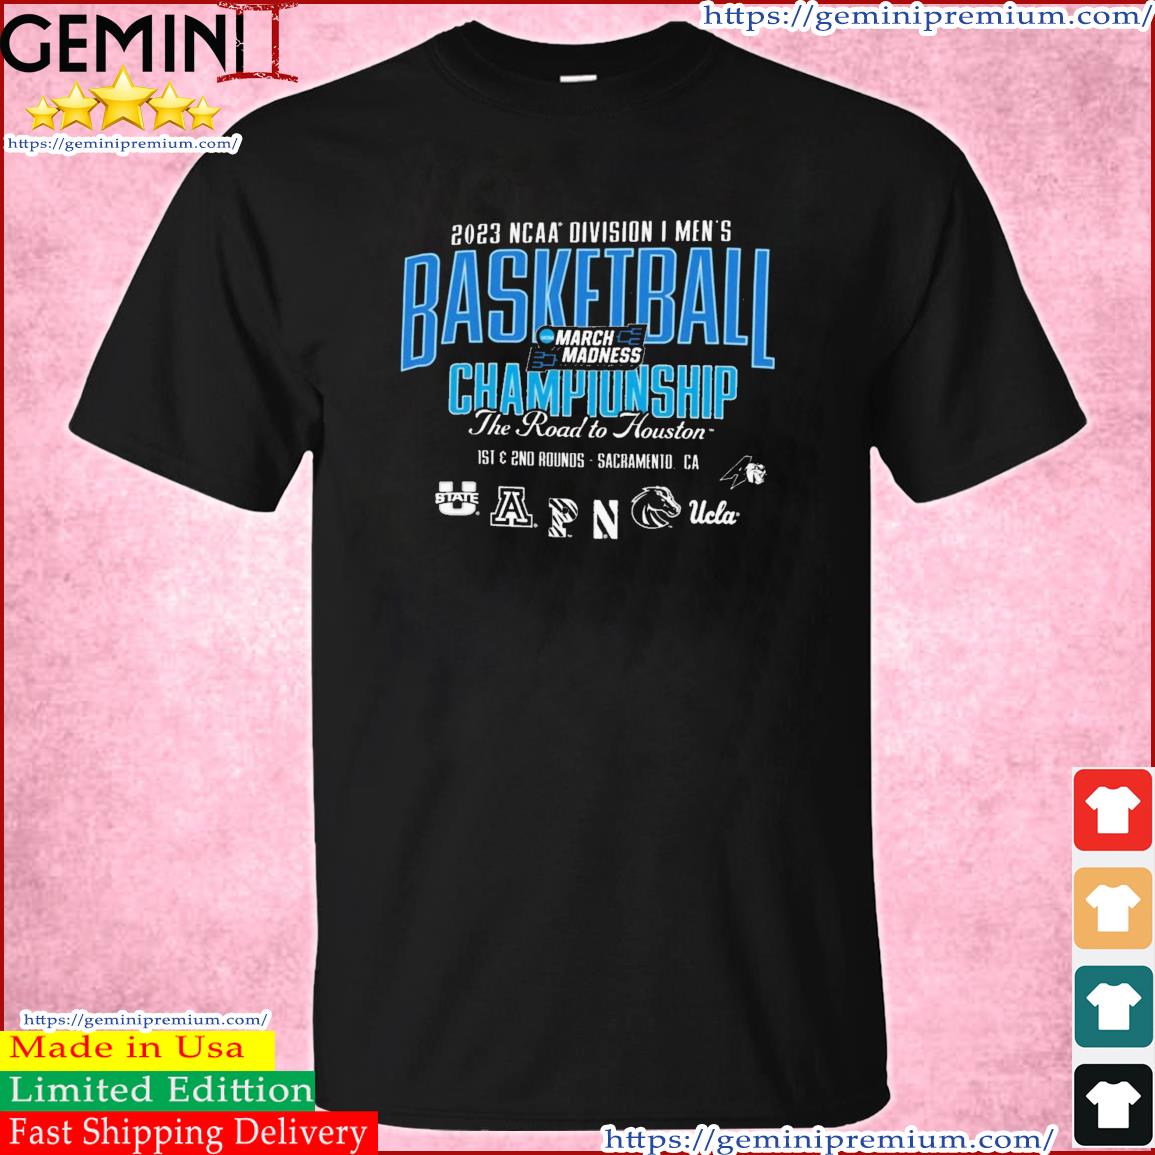 March Madness 2023 NCAA Division I Men's Basketball 1st & 2nd Rounds Sacramento Shirt